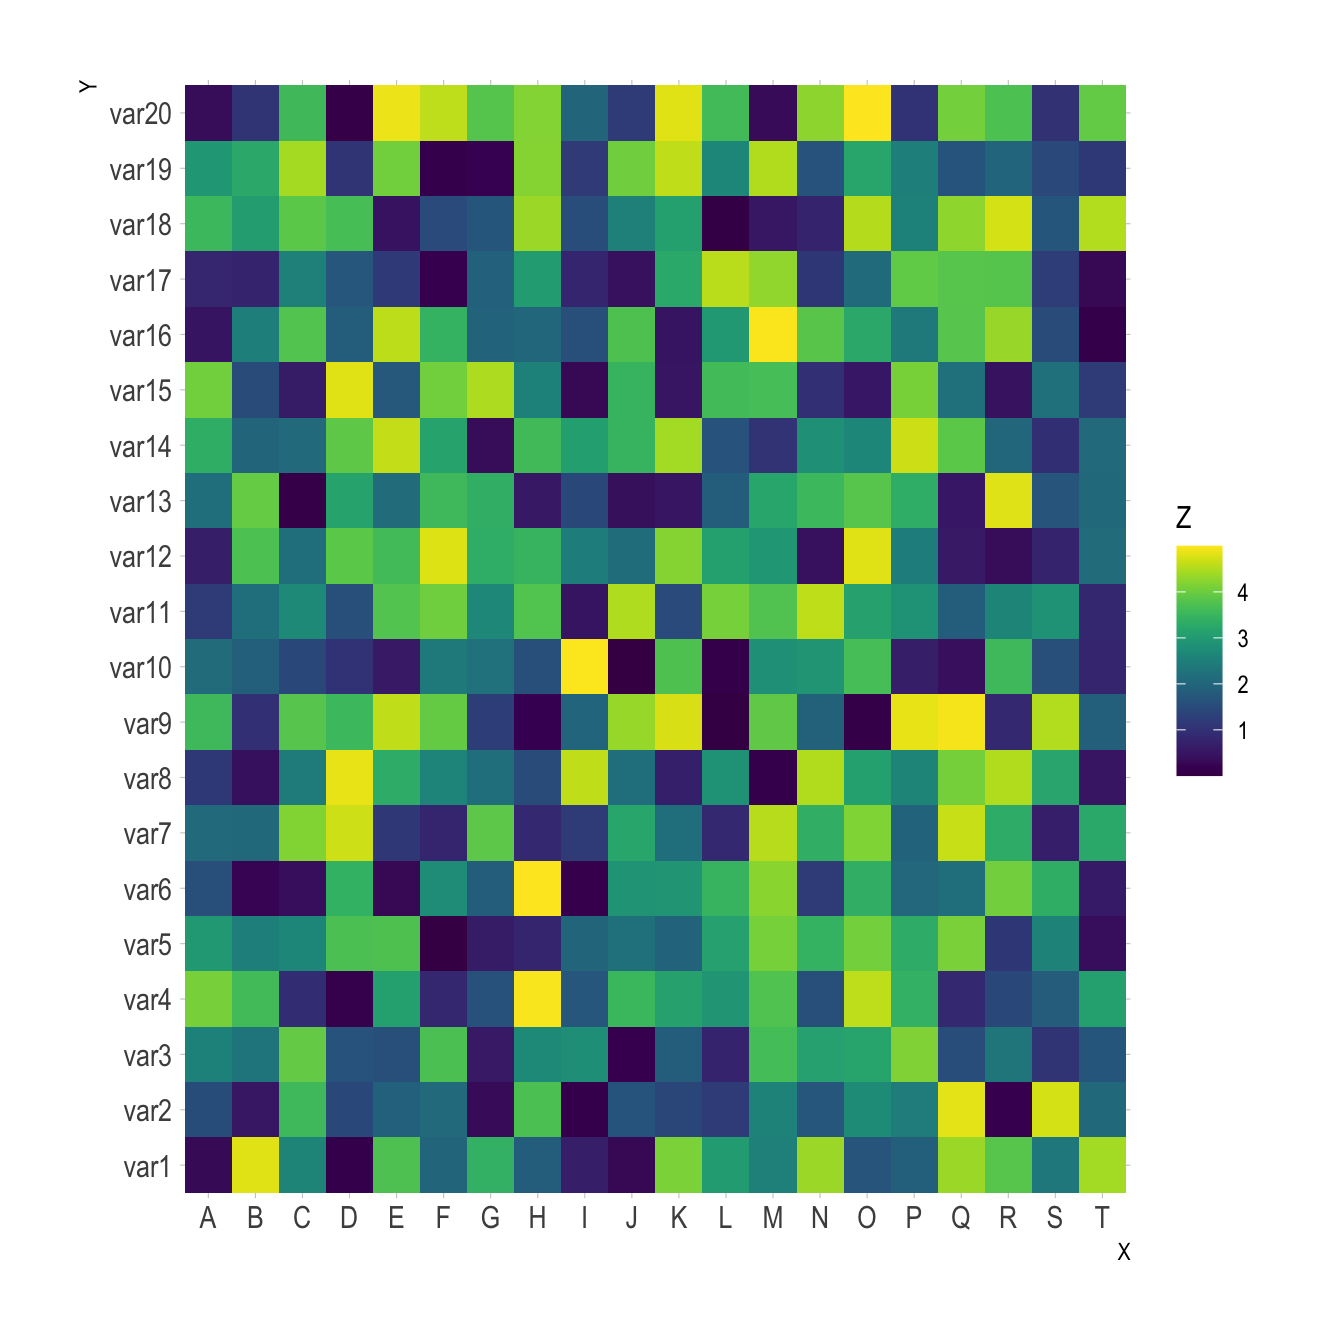 R Legends Not Showing Up Properly In Heatmap With Ggplot Stack Vrogue